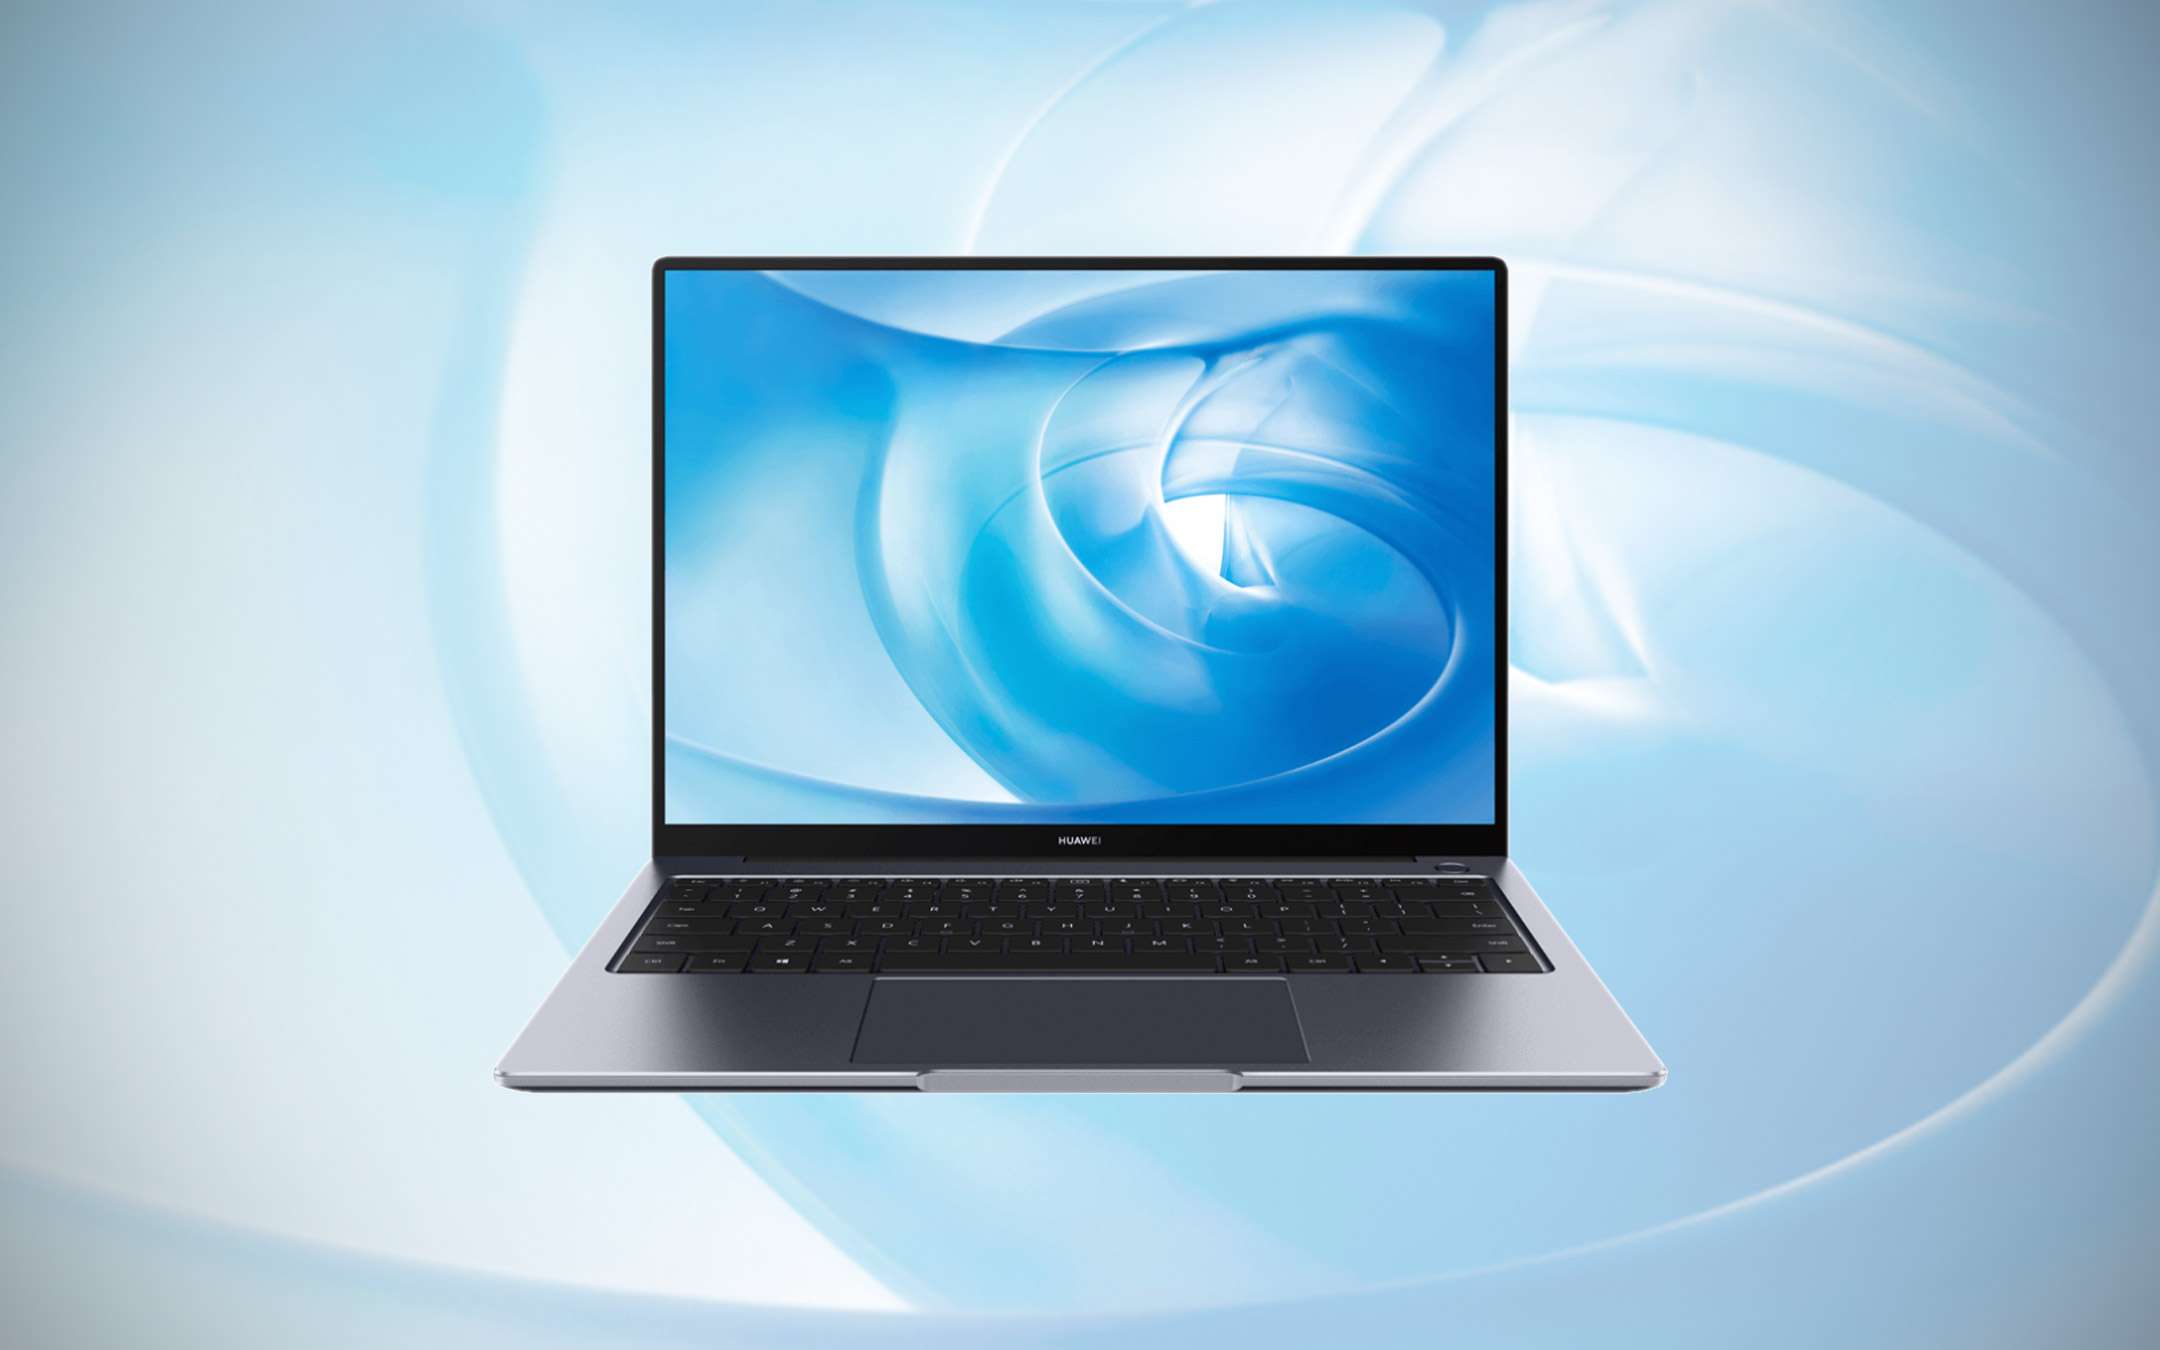 Here is the new Huawei MateBook 14 with Intel CPU